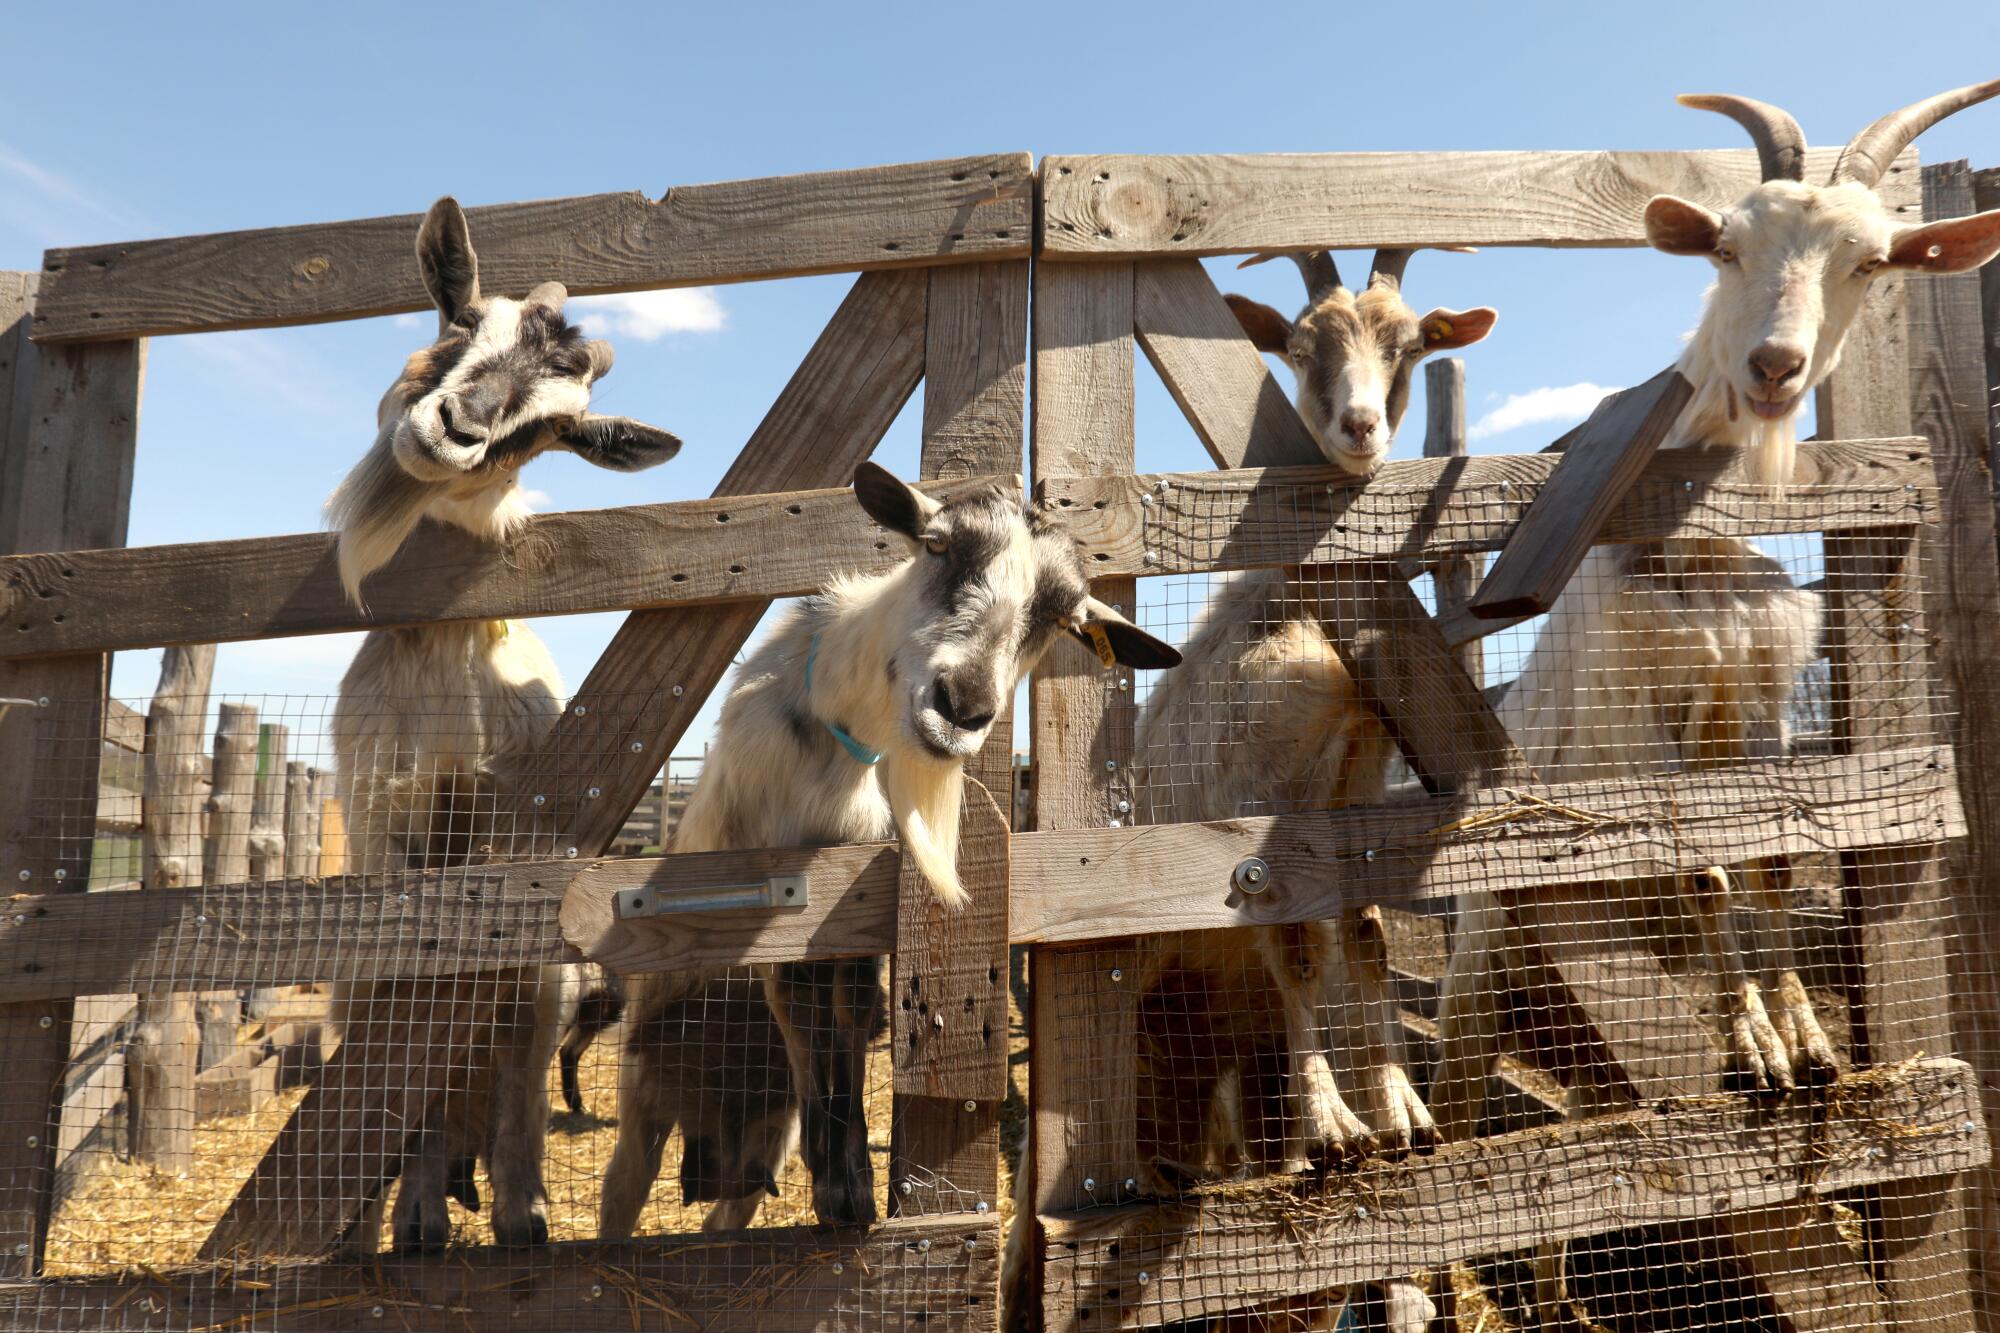 Goats in an enclosure